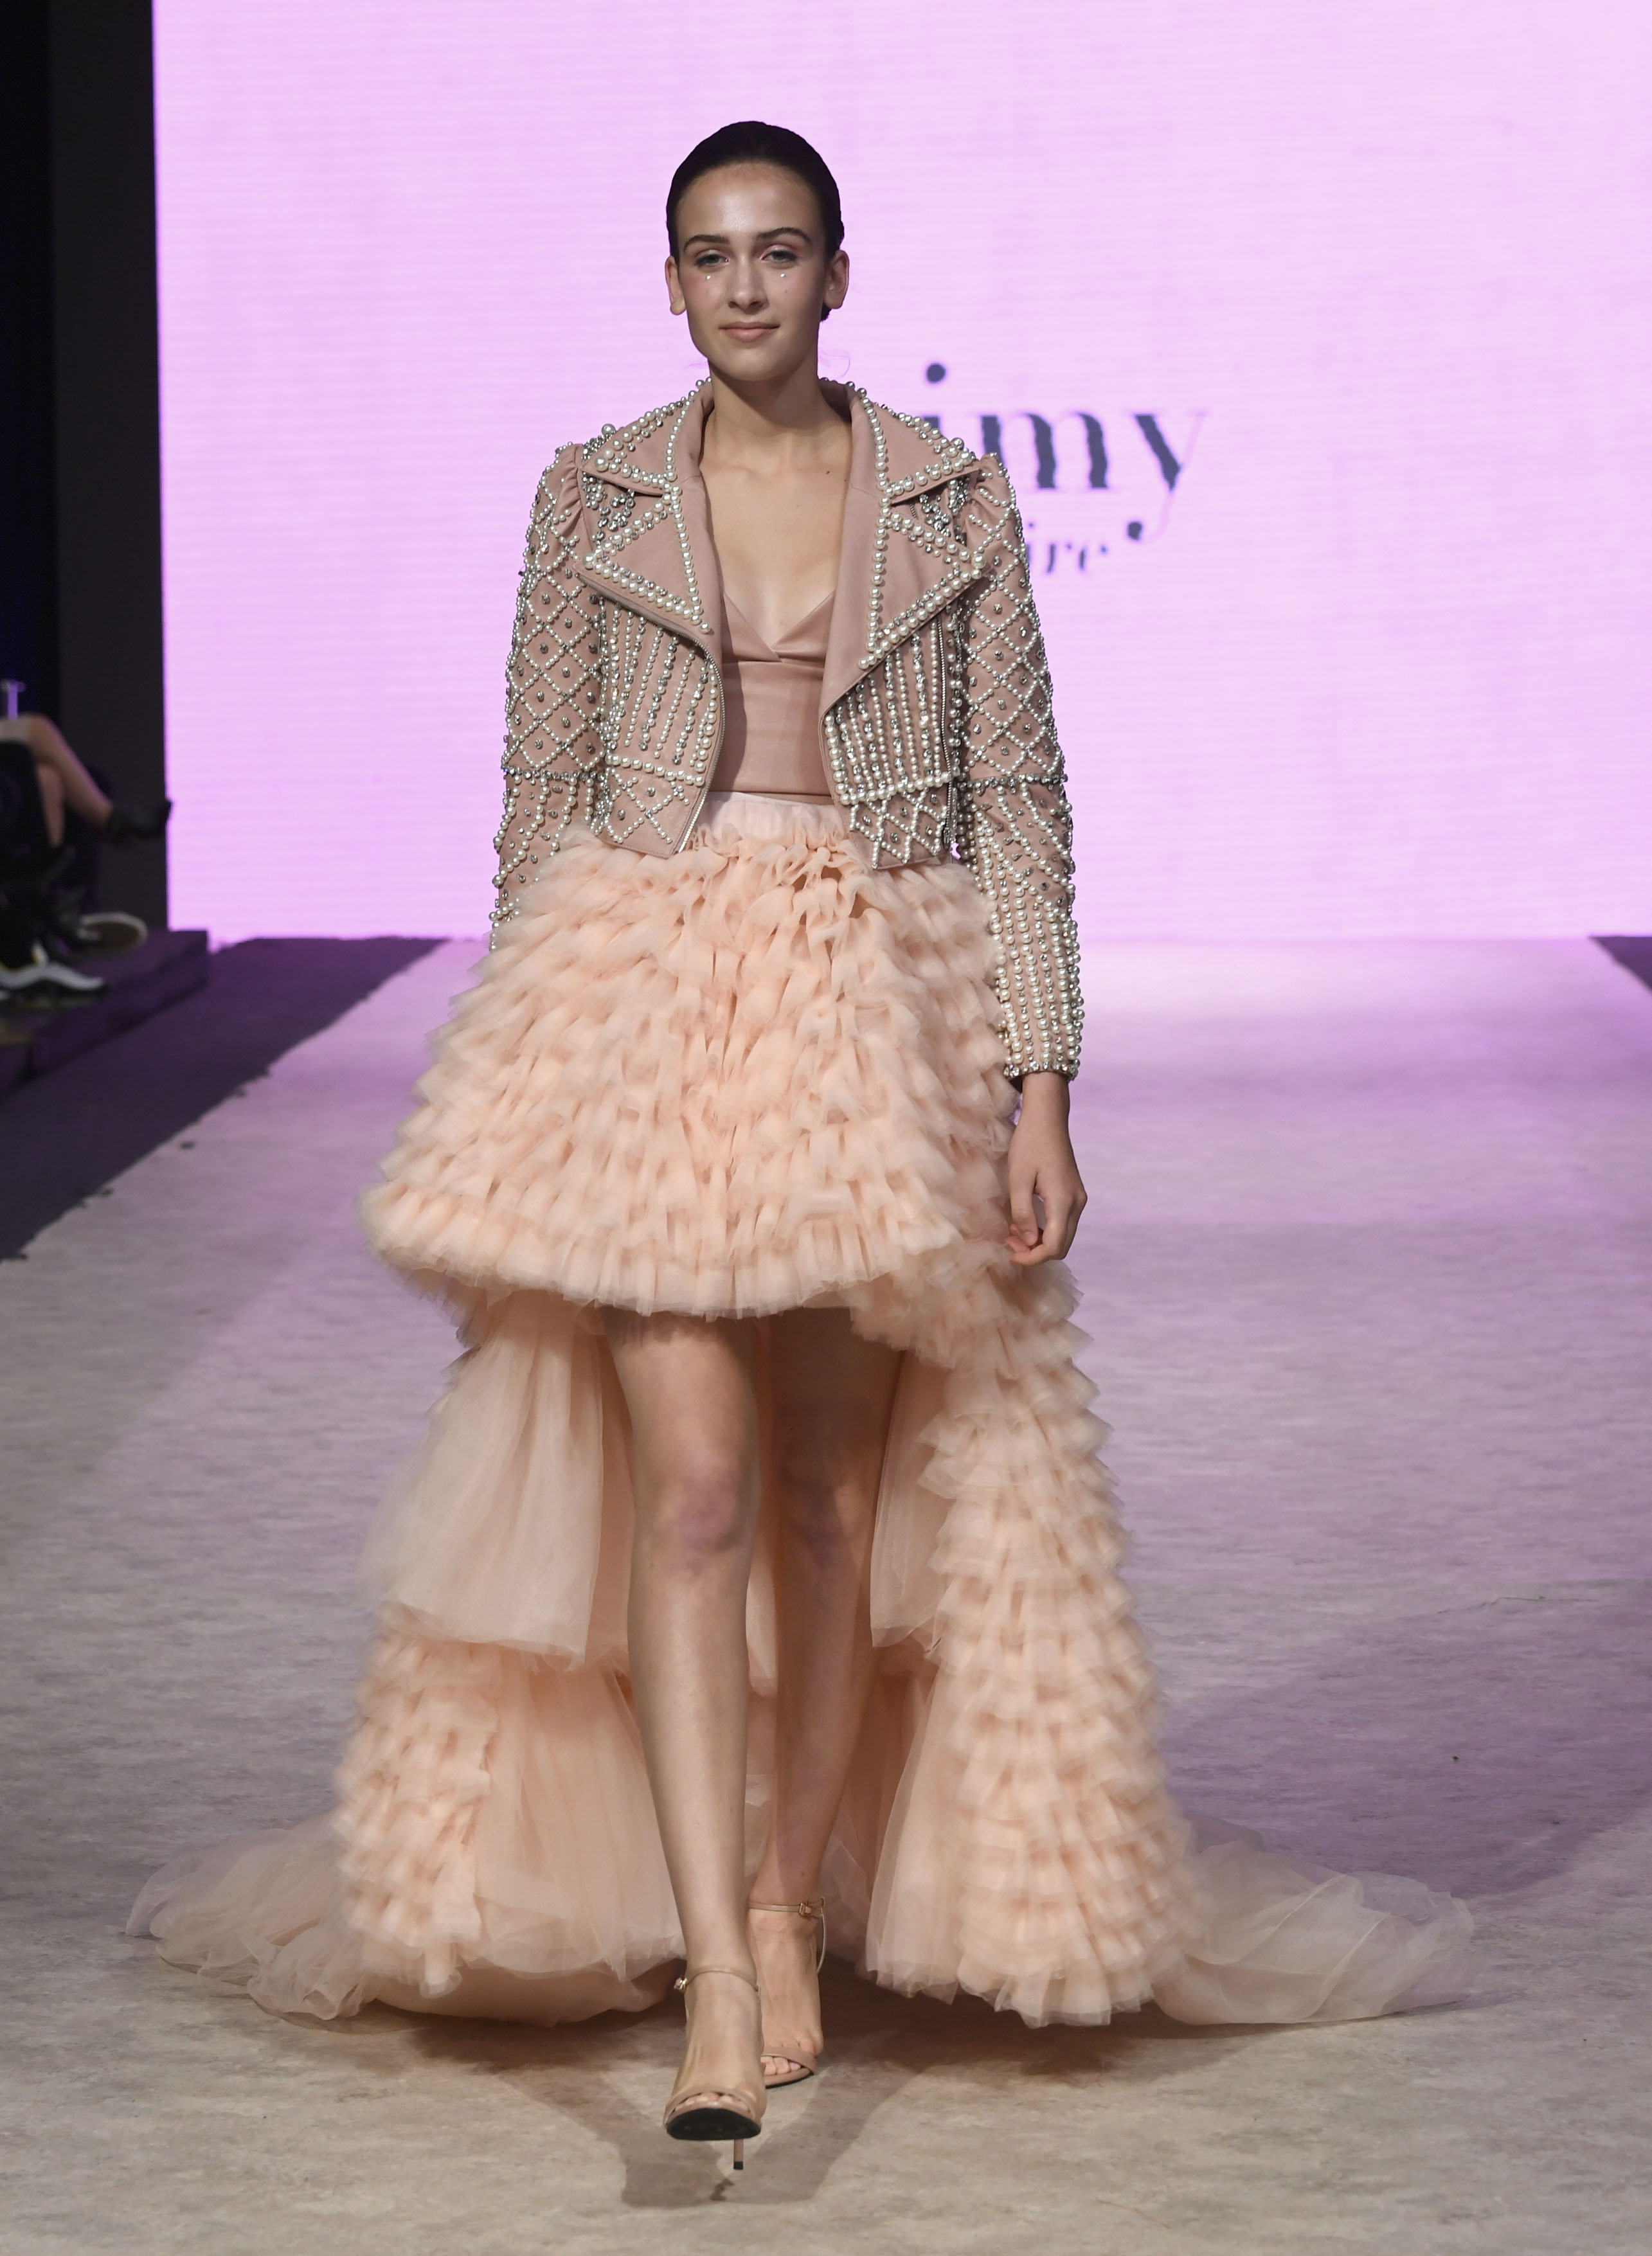 VANCOUVER, BC - SEPTEMBER 22:  A model walks the runway wearing eimy istoire at Vancouver Fashion Week Spring/Summer 19 - Day 6on September 22, 2018 in Vancouver, Canada.  (Photo by Arun Nevader/Getty Images for VFW Management INC)